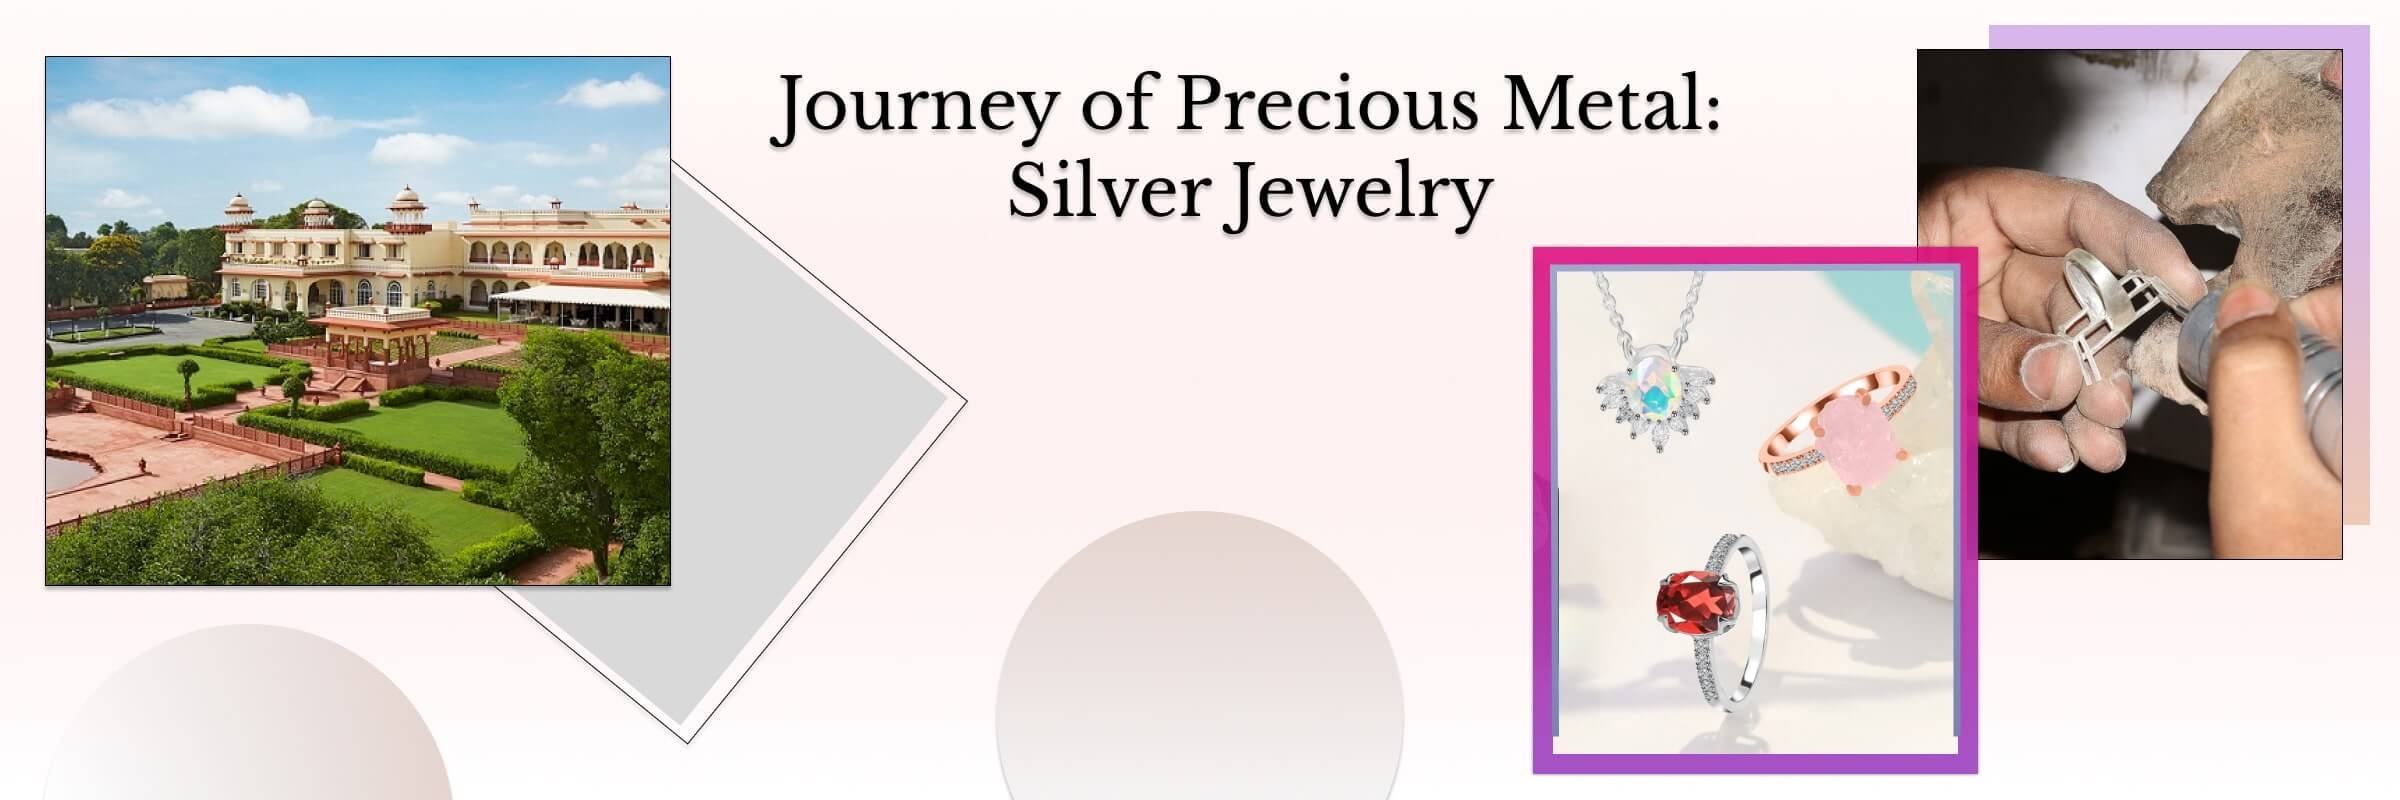 Process of Silver Jewelry Manufacturing